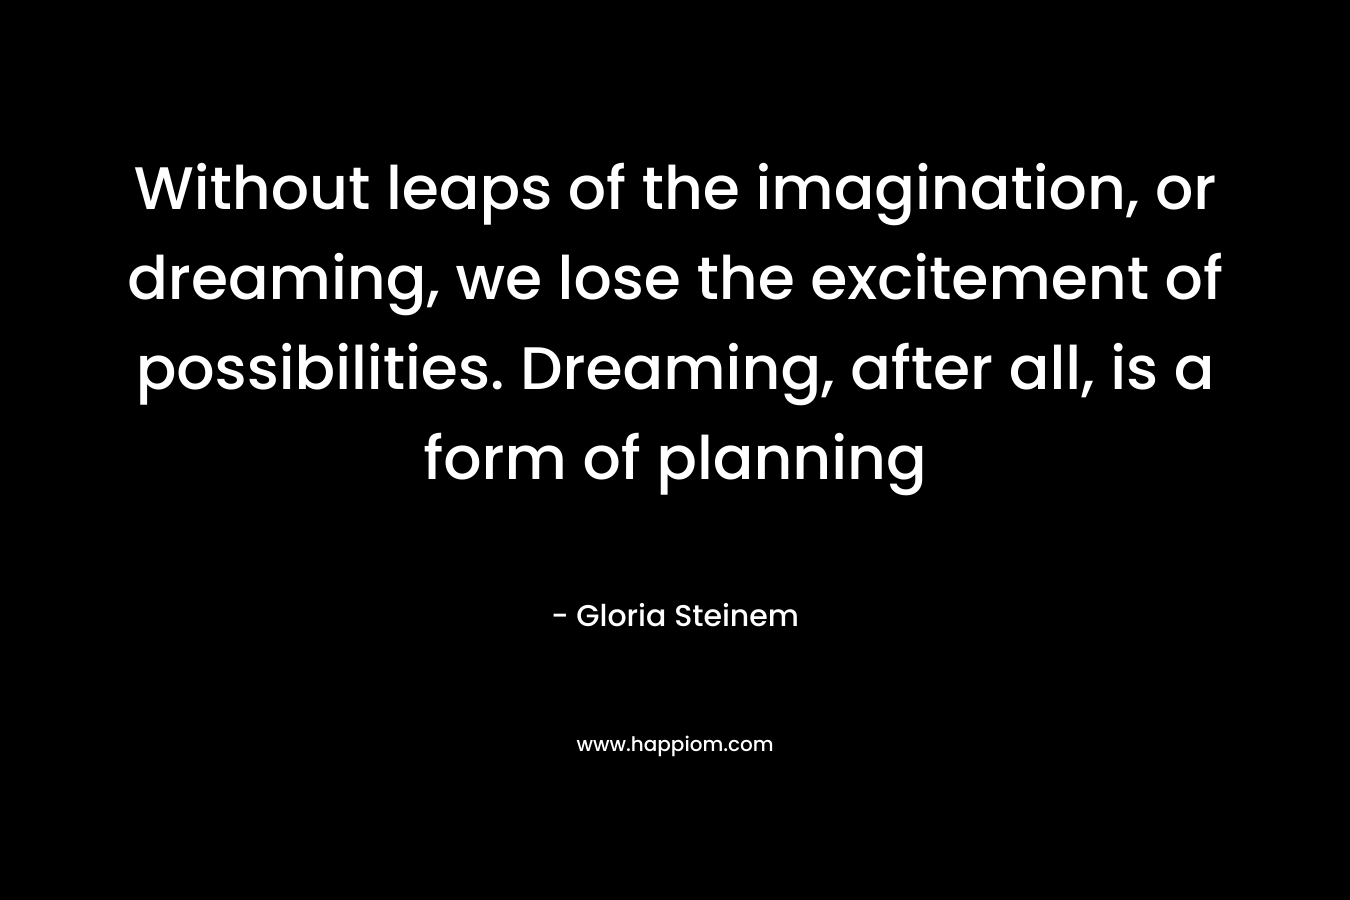 Without leaps of the imagination, or dreaming, we lose the excitement of possibilities. Dreaming, after all, is a form of planning